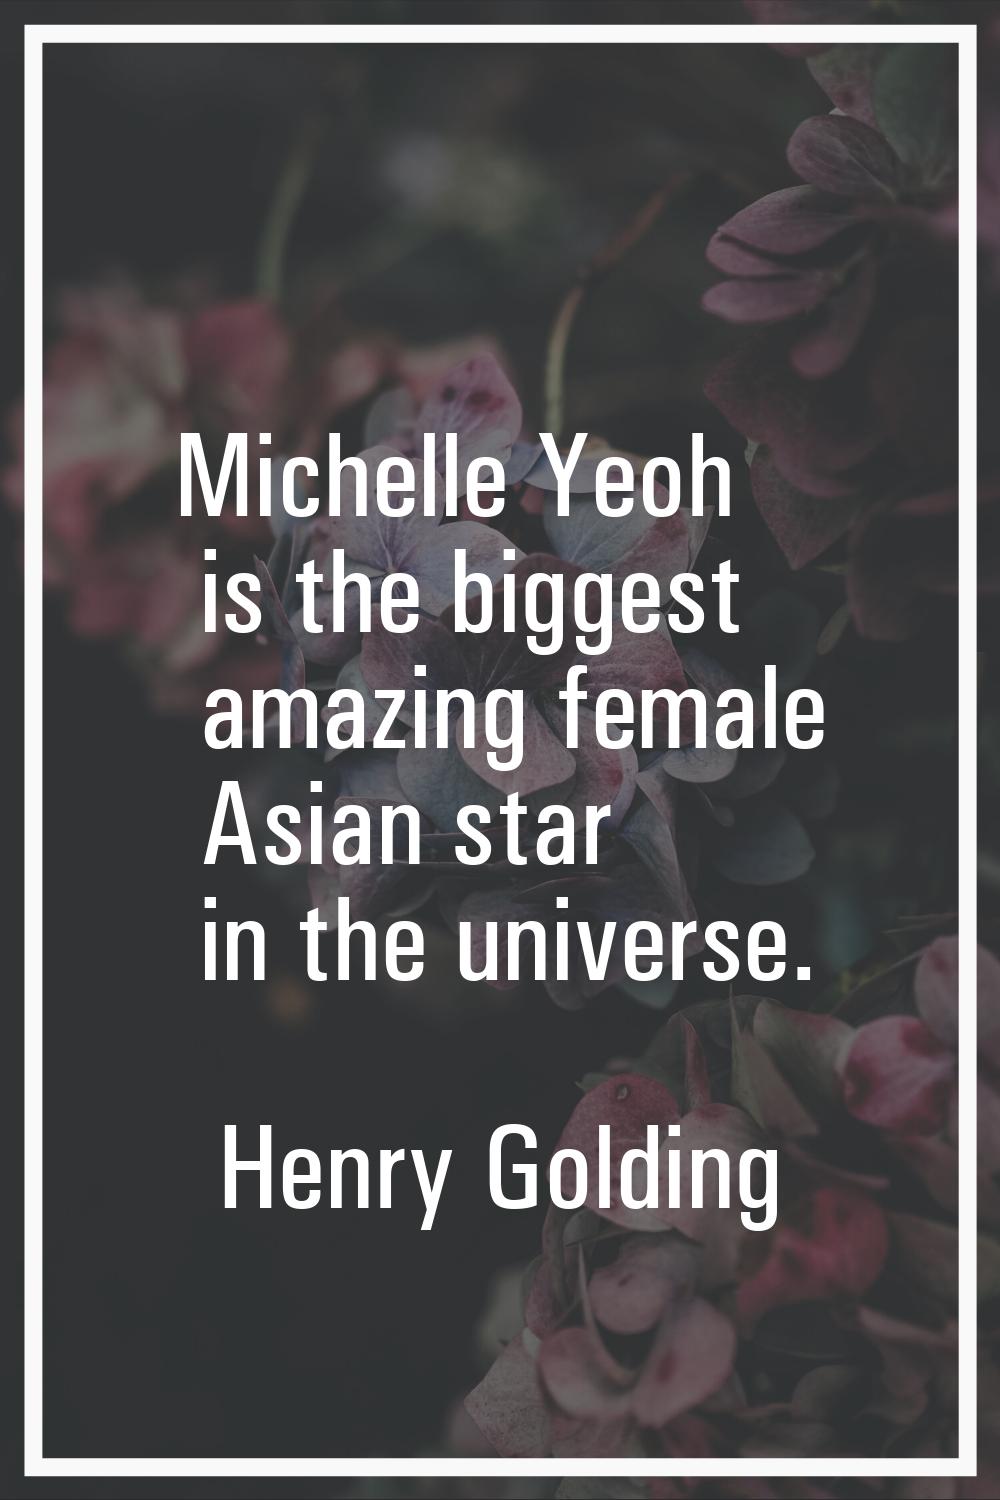 Michelle Yeoh is the biggest amazing female Asian star in the universe.